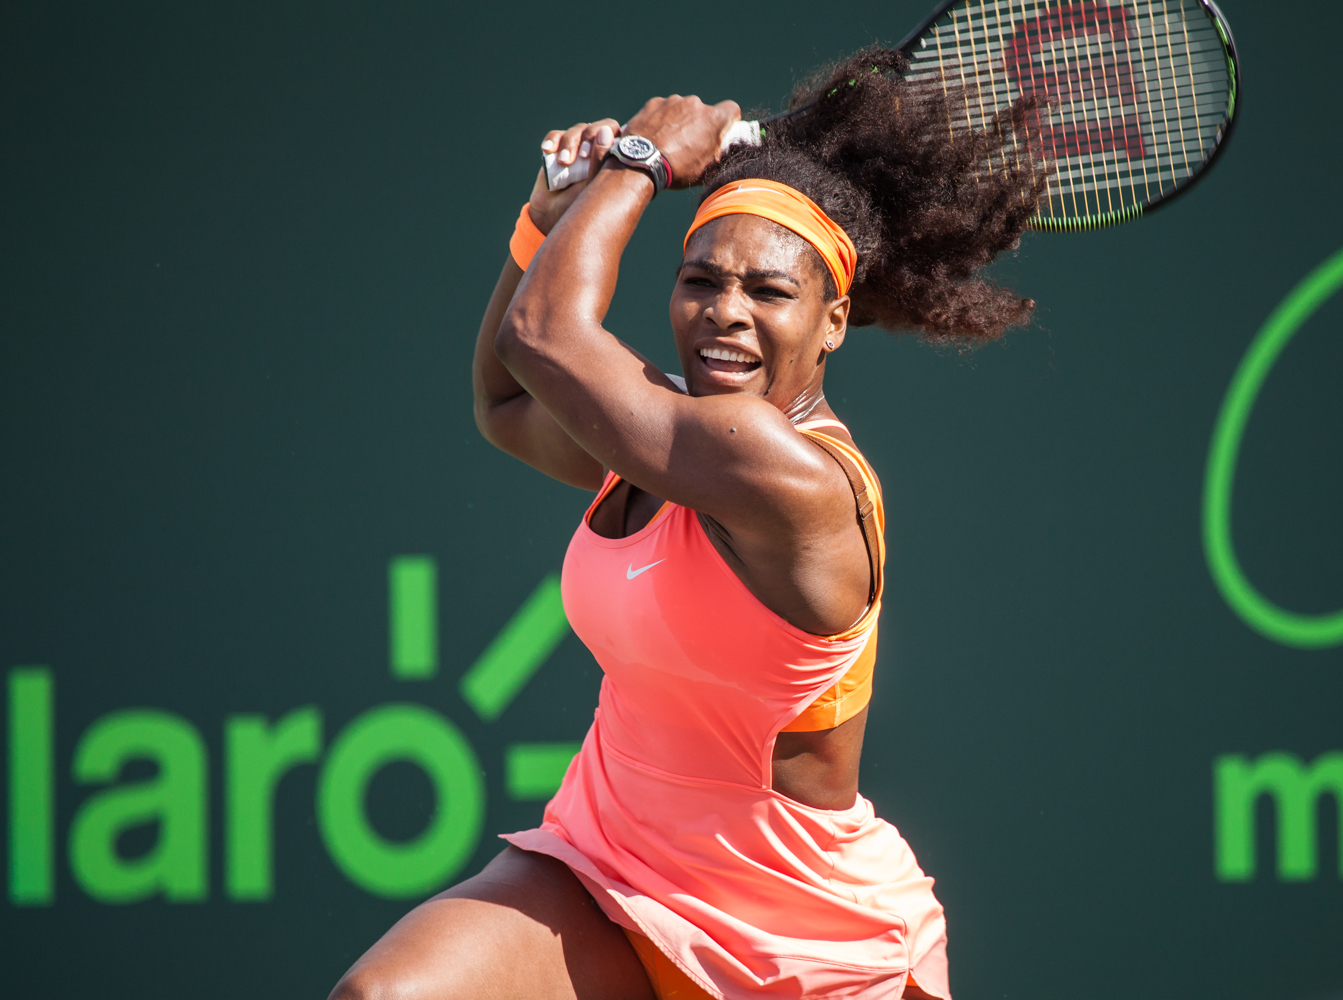  Serena Williams hitting a backhand during the Miami Open 2105 